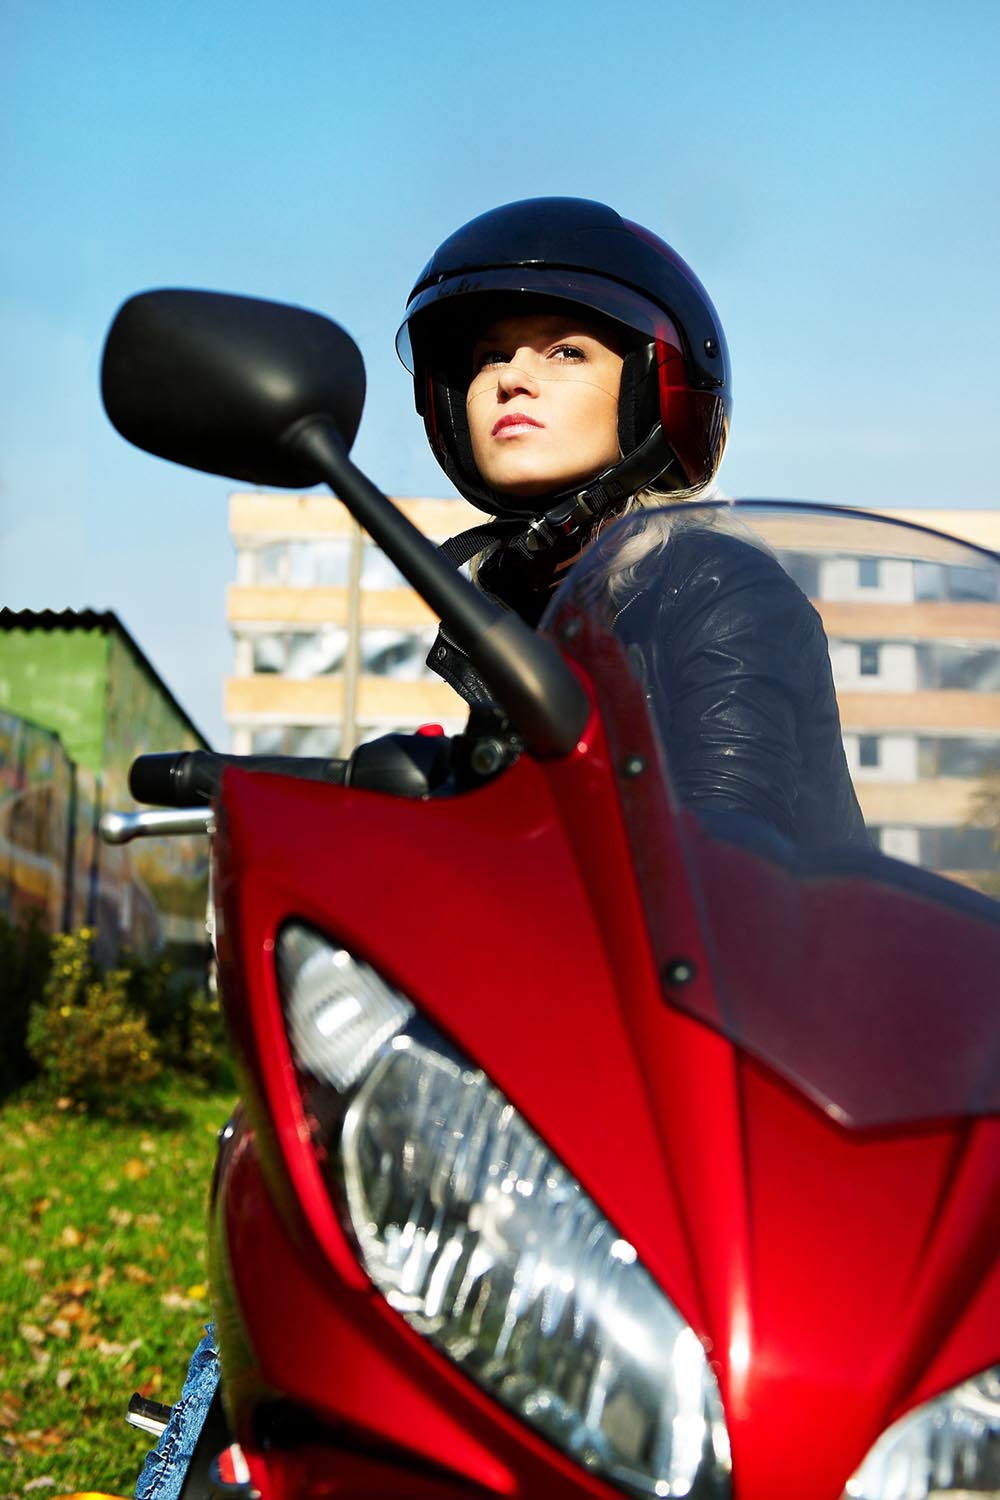 The blonde in a helmet on a red motorcycle